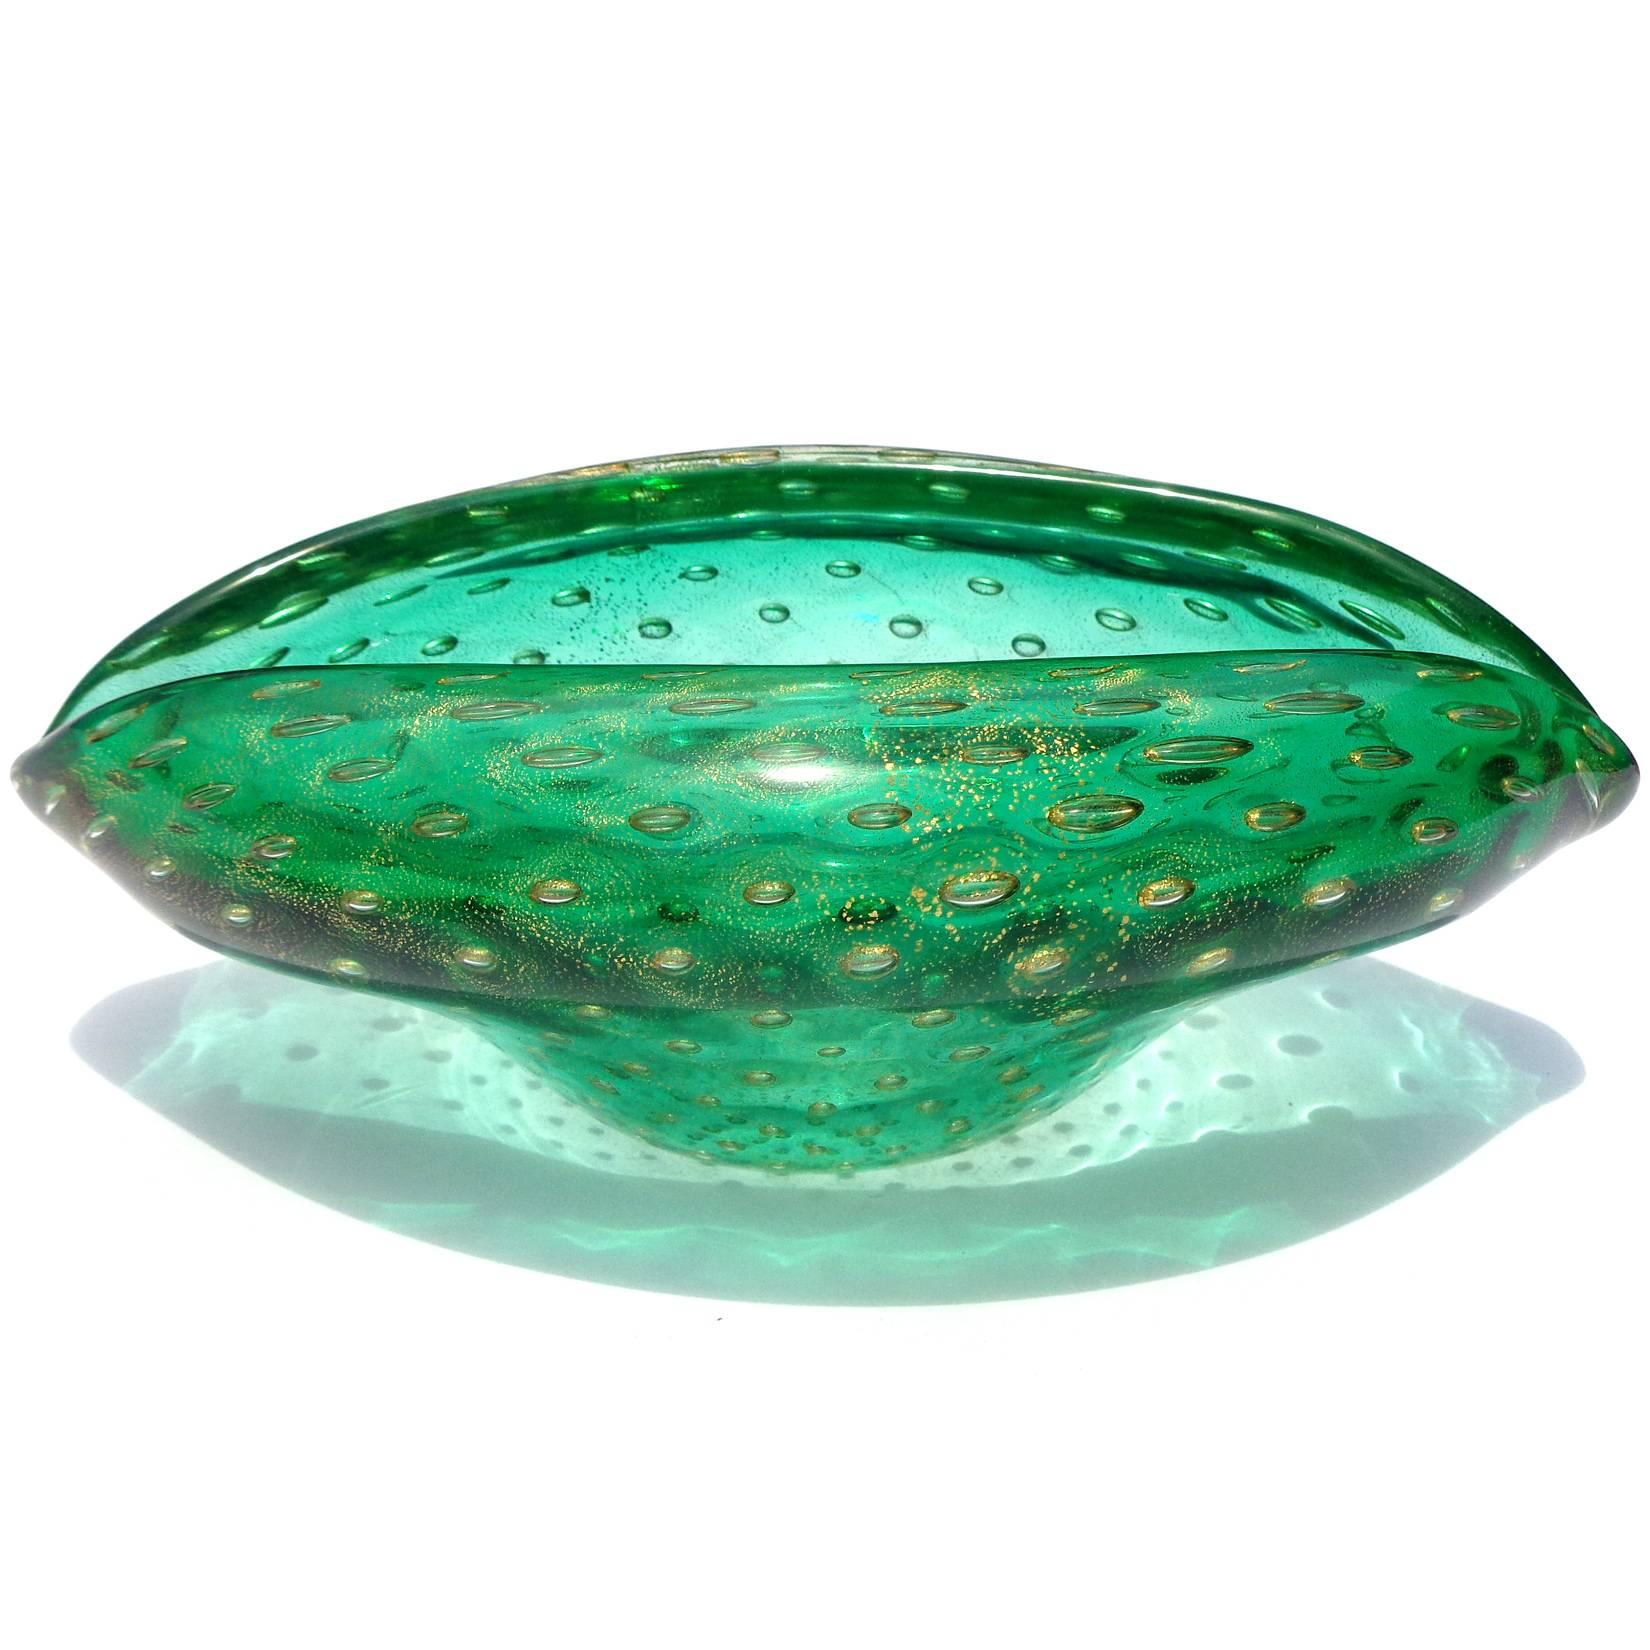 Free shipping worldwide! See details below description.

Unique Murano hand blown green and gold flecks art glass clam shell decorative bowl. Attributed to designer Archimede Seguso. The piece is done in 